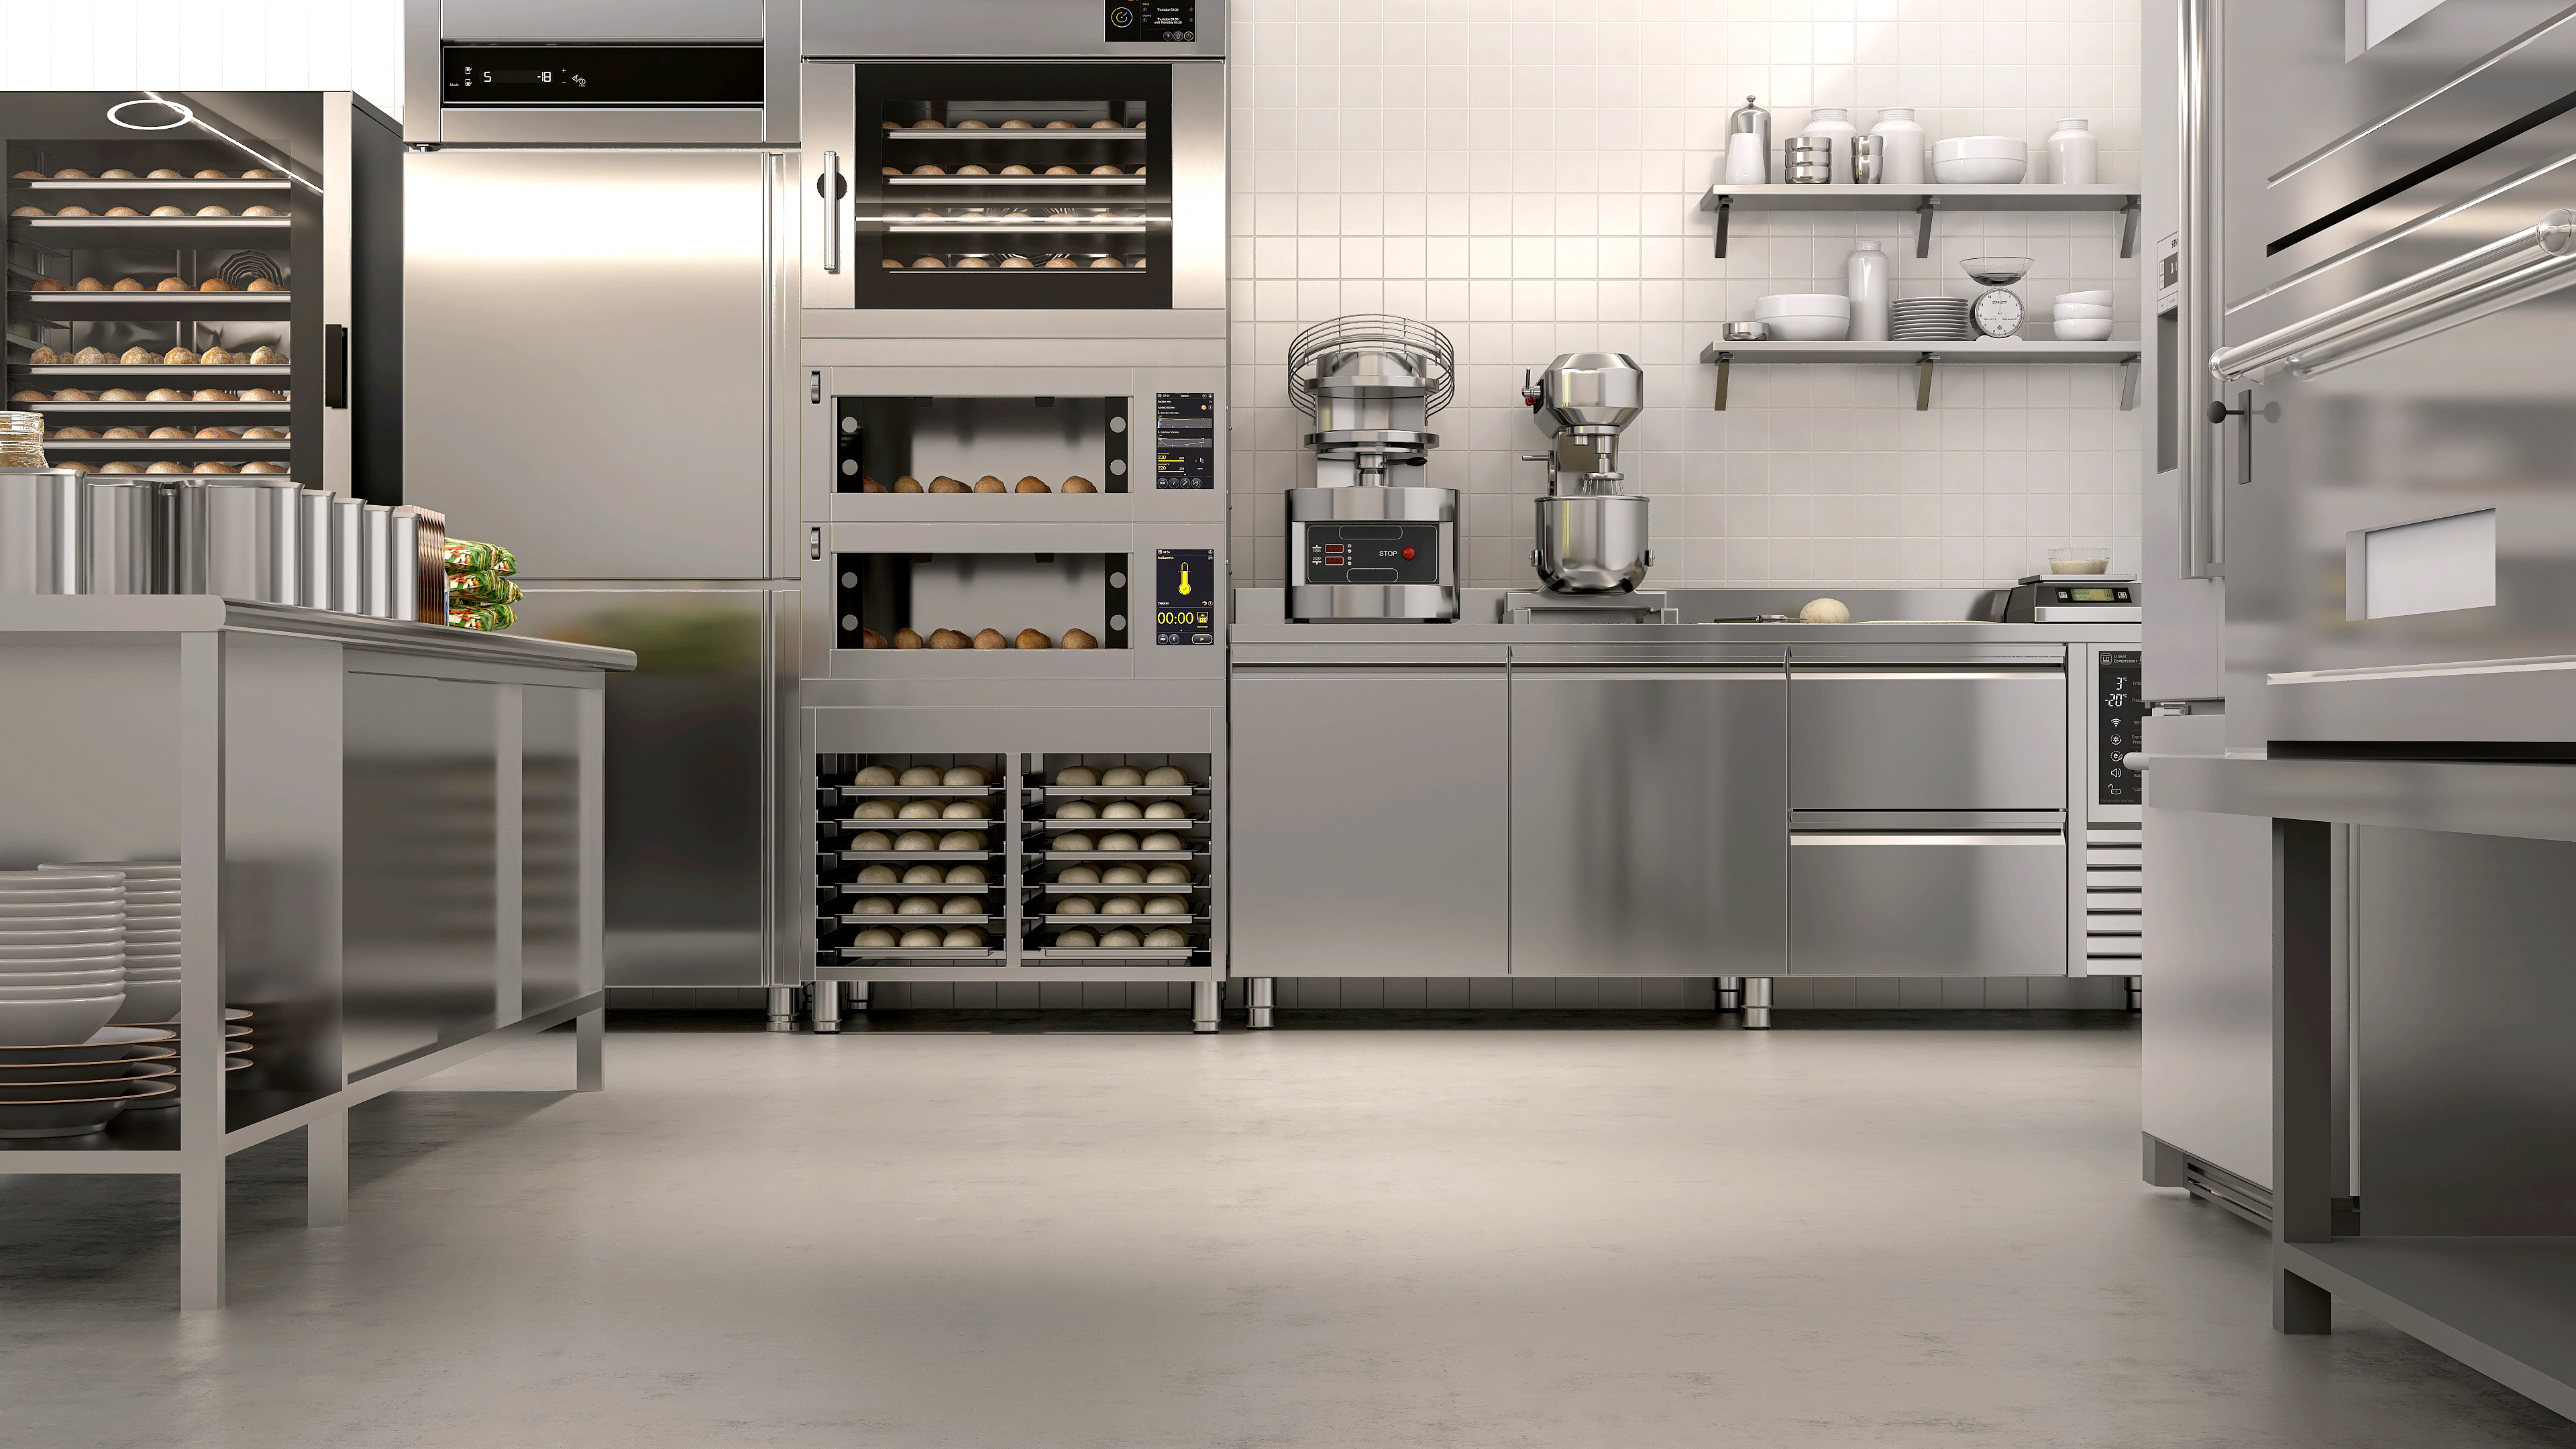 How to choose the right catering appliances for your commercial establishment